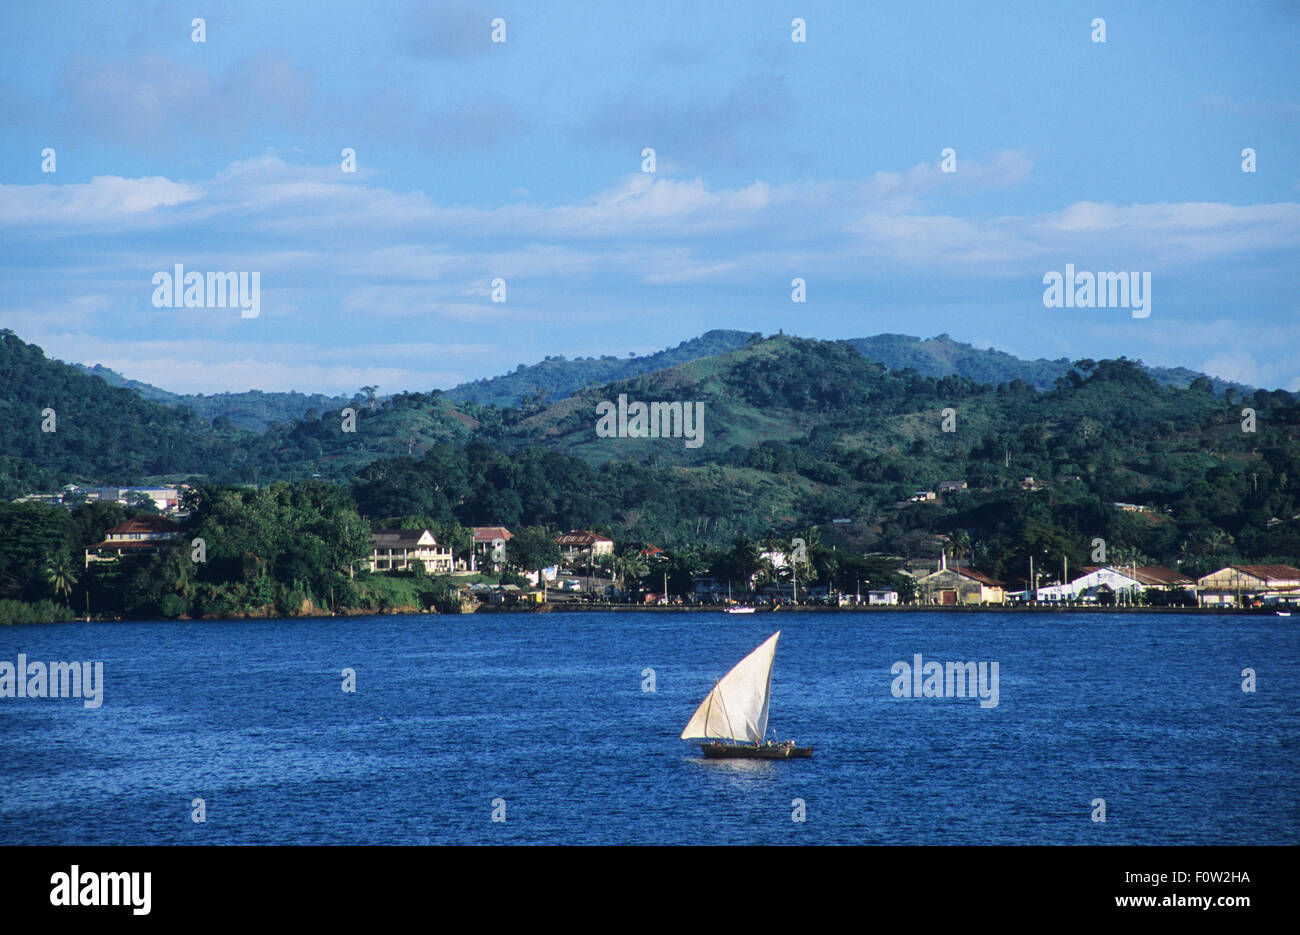 A pirogue sails past Andoany or Hell-Ville's shore, capital of Nosy Be island, where colonial buildings have been restored, Diana Region, Madagascar, Indian Ocean Stock Photo